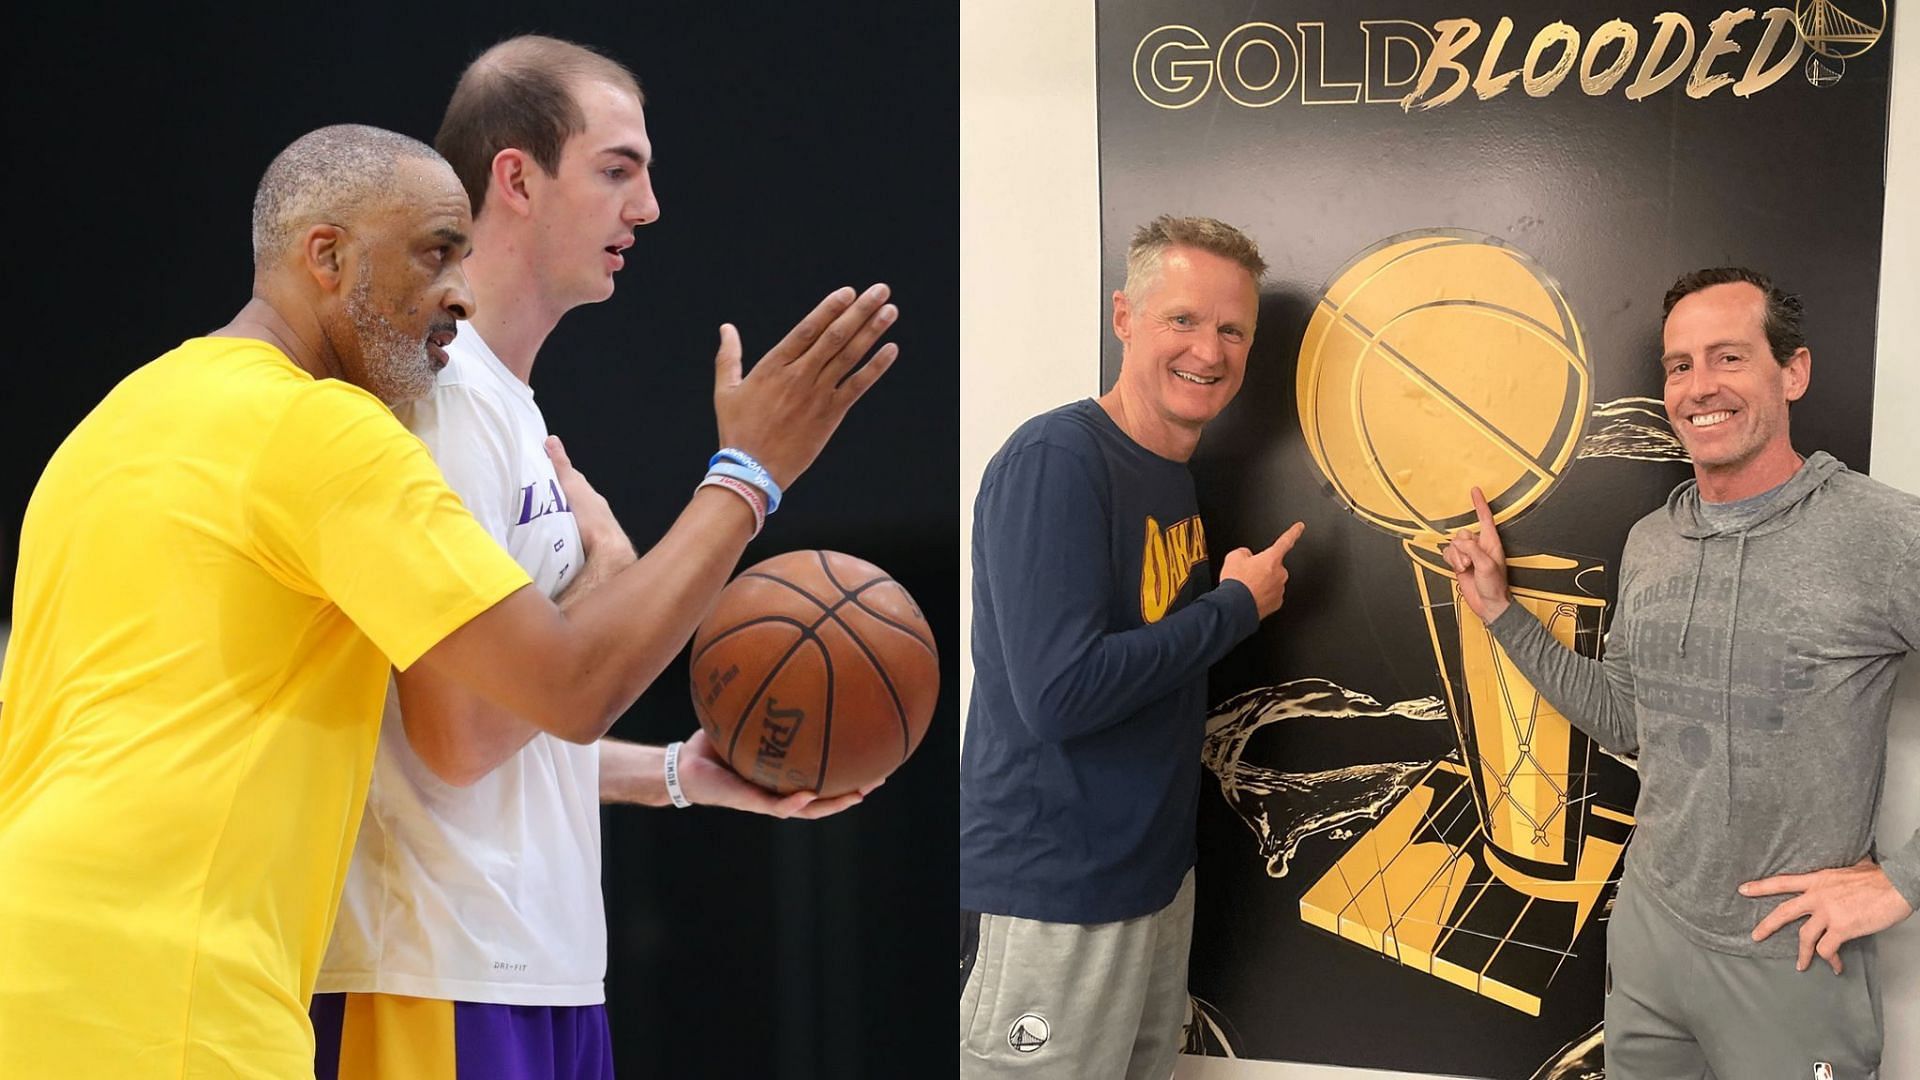 Lakers assistant coach Phil Handy with former Laker Alex Caruso and Warriors head coach Steve Kerr with assistant Kenny Atkinson